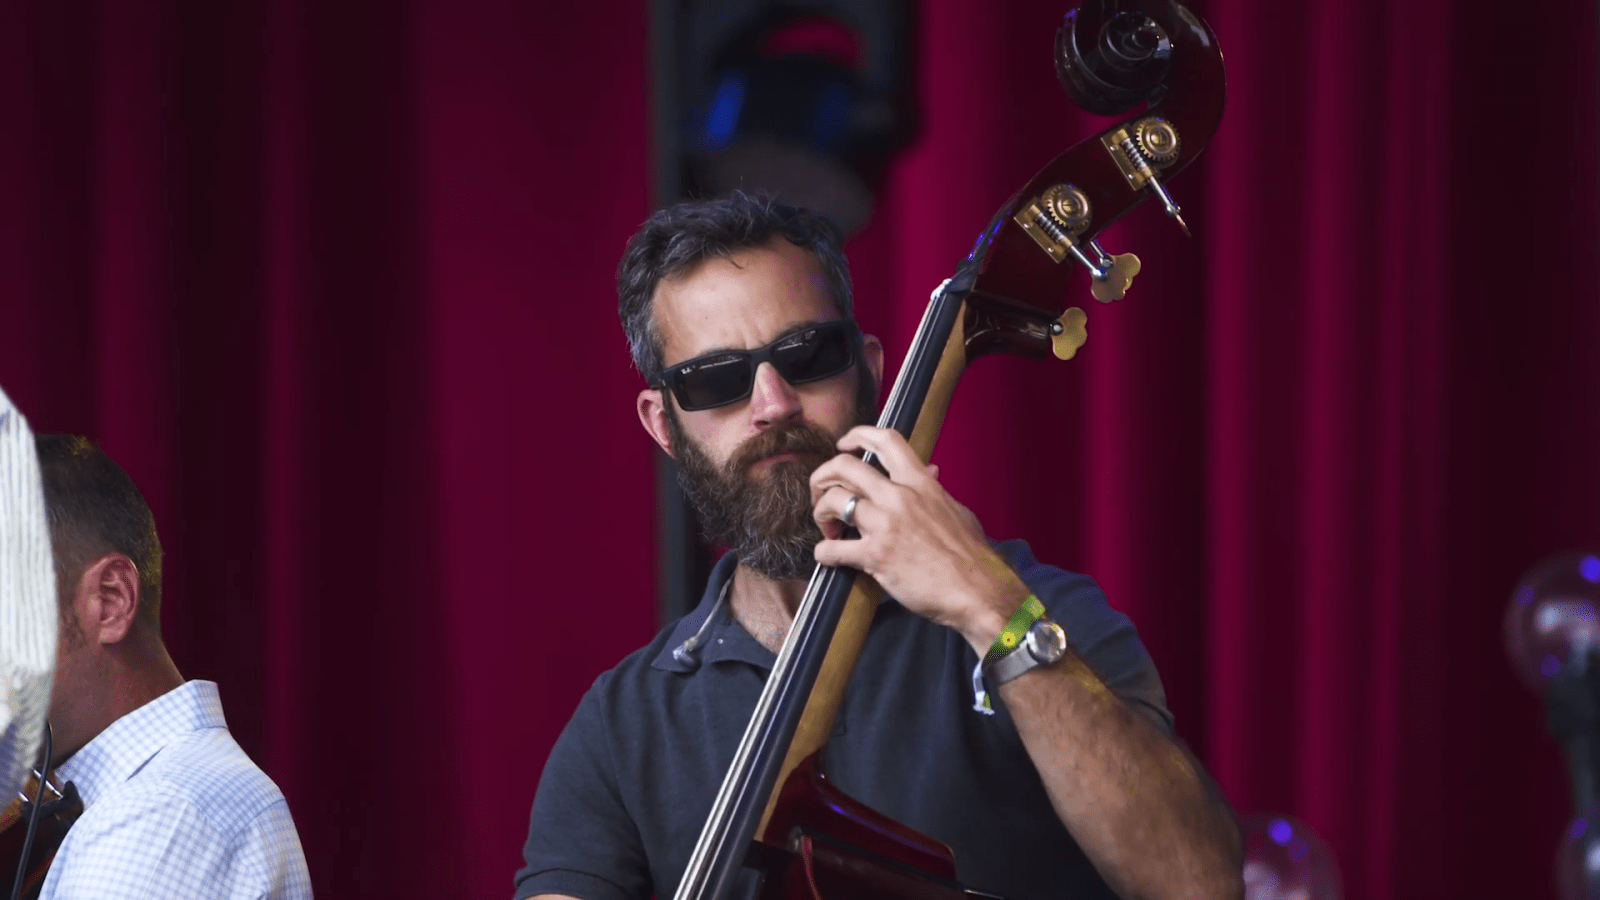 Man in sunglasses performs on an upright bass